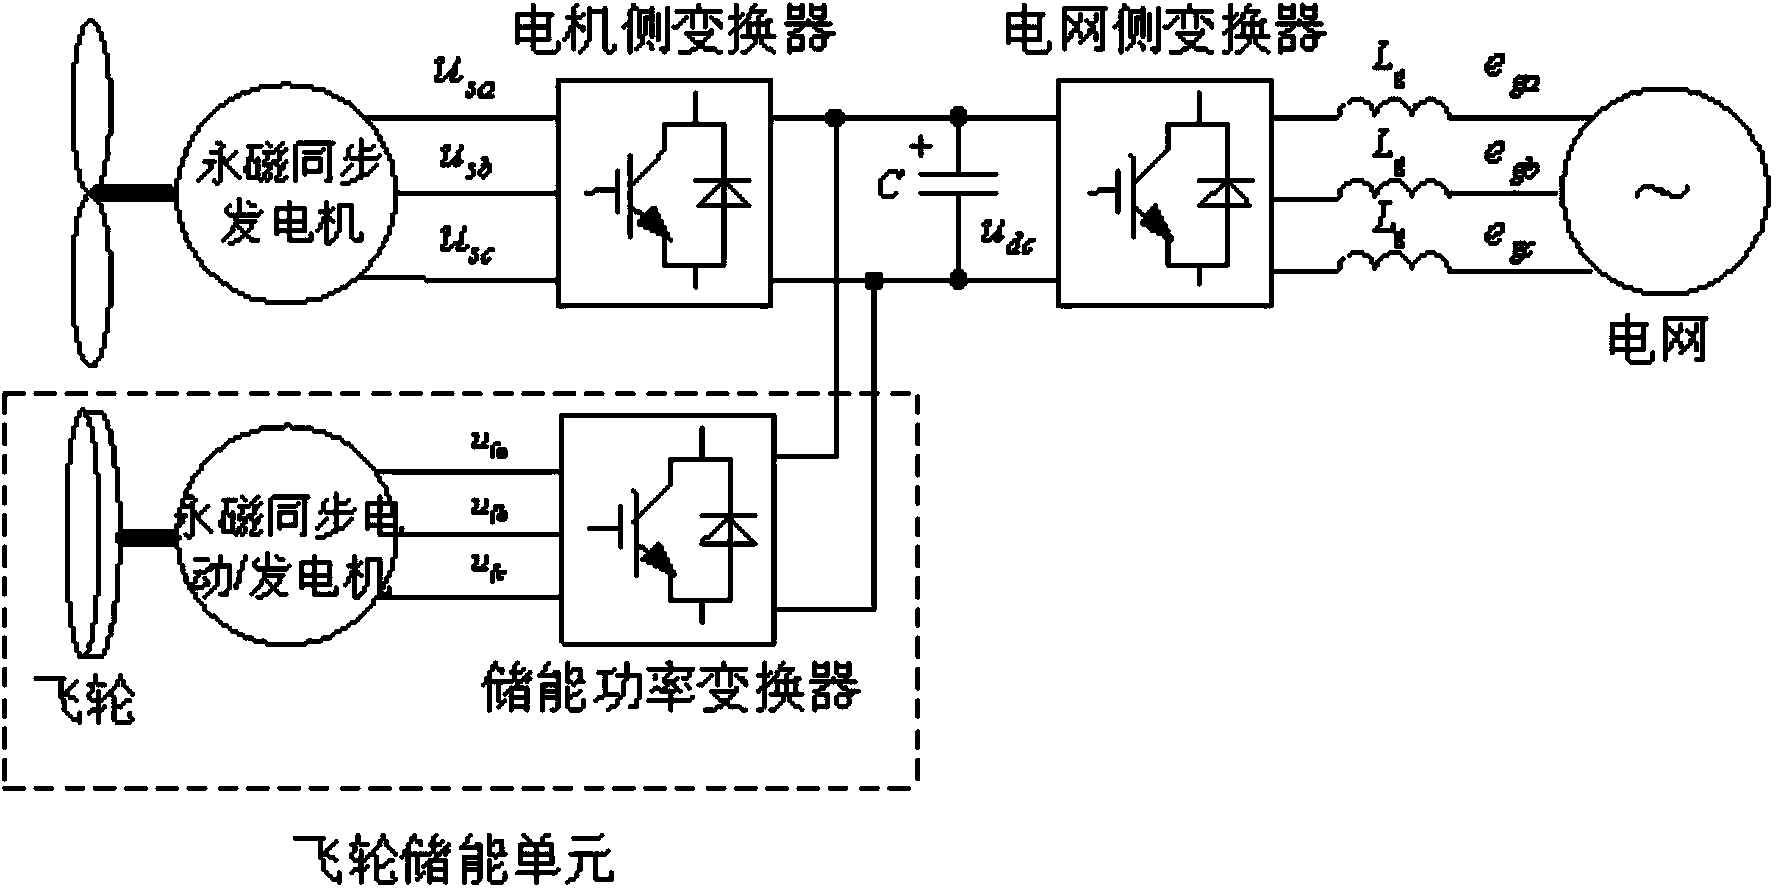 Method for allowing permanent magnetic direct drive wind power generation system to participate in frequency adjustment of power grid on basis of fuzzy control